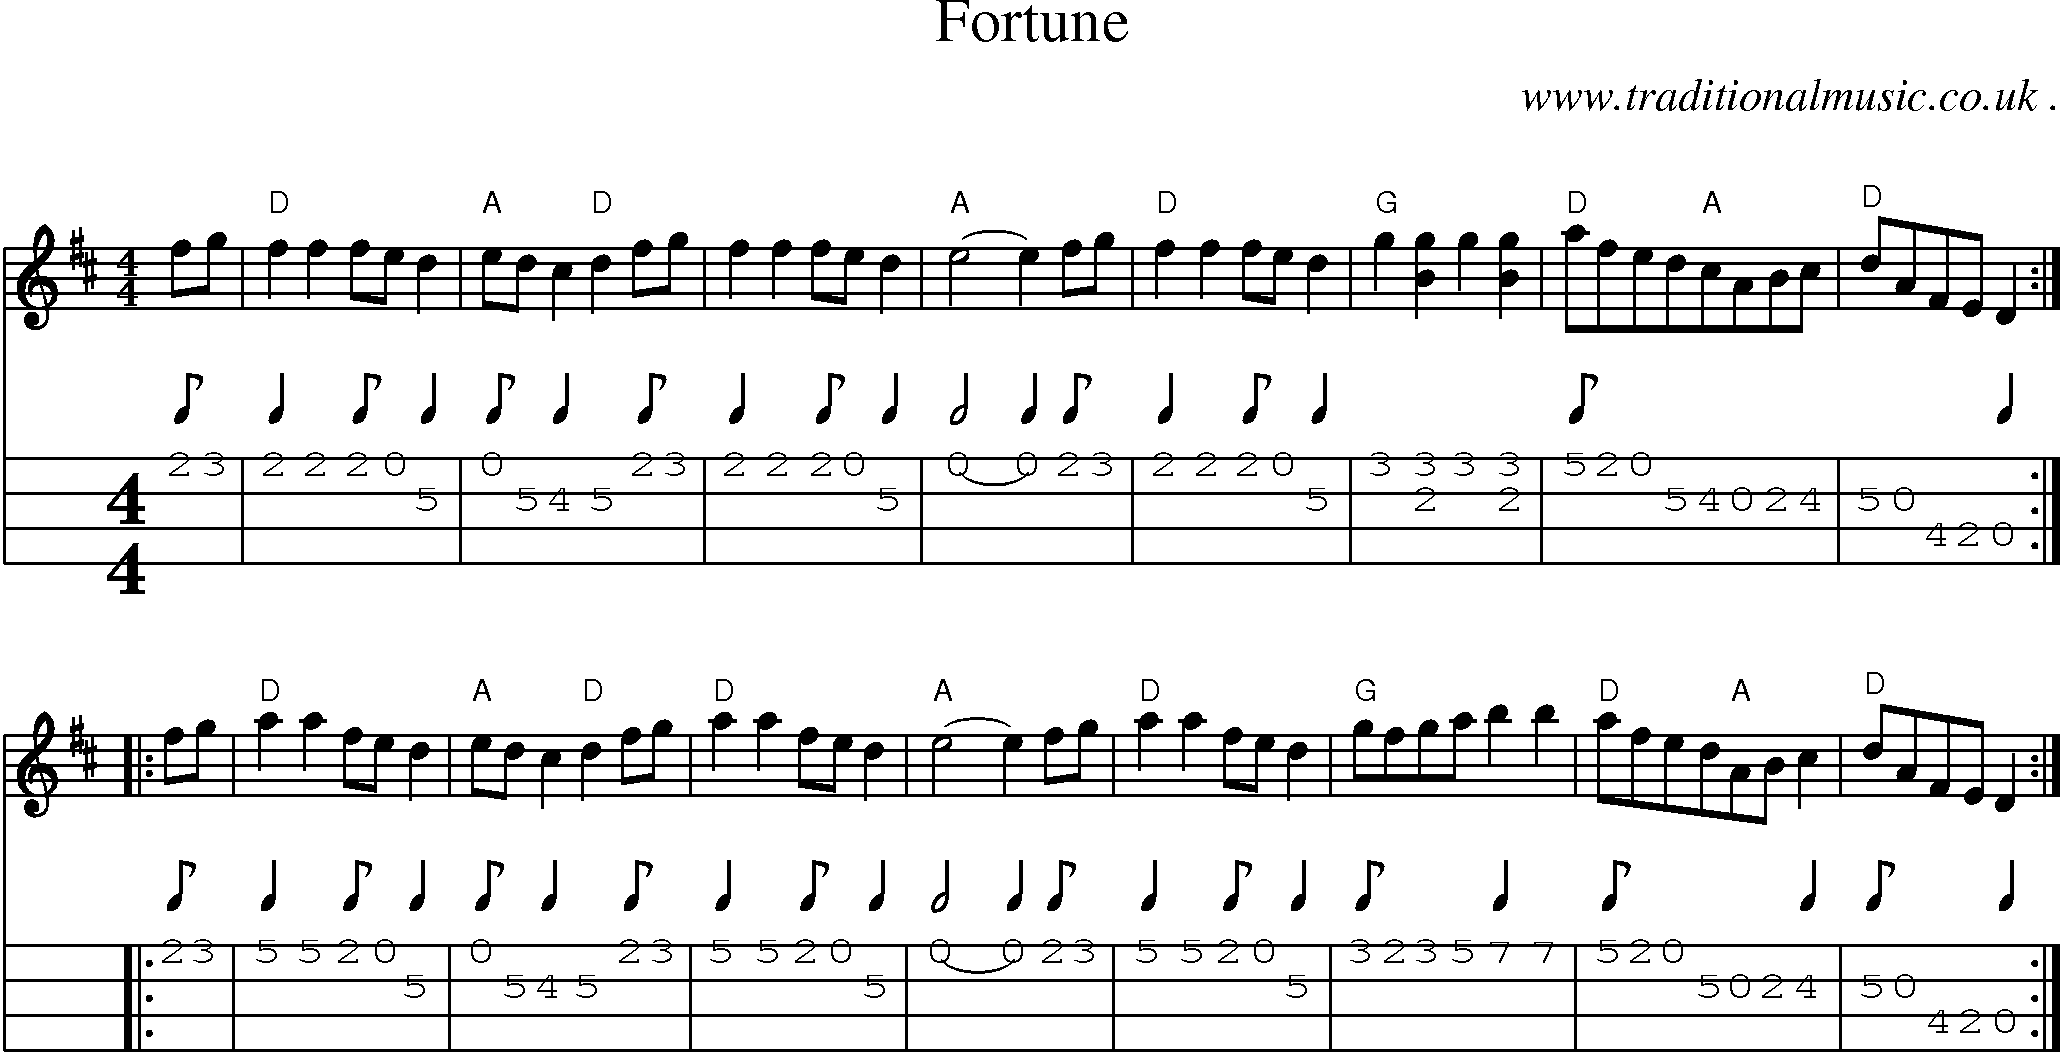 Music Score and Mandolin Tabs for Fortune